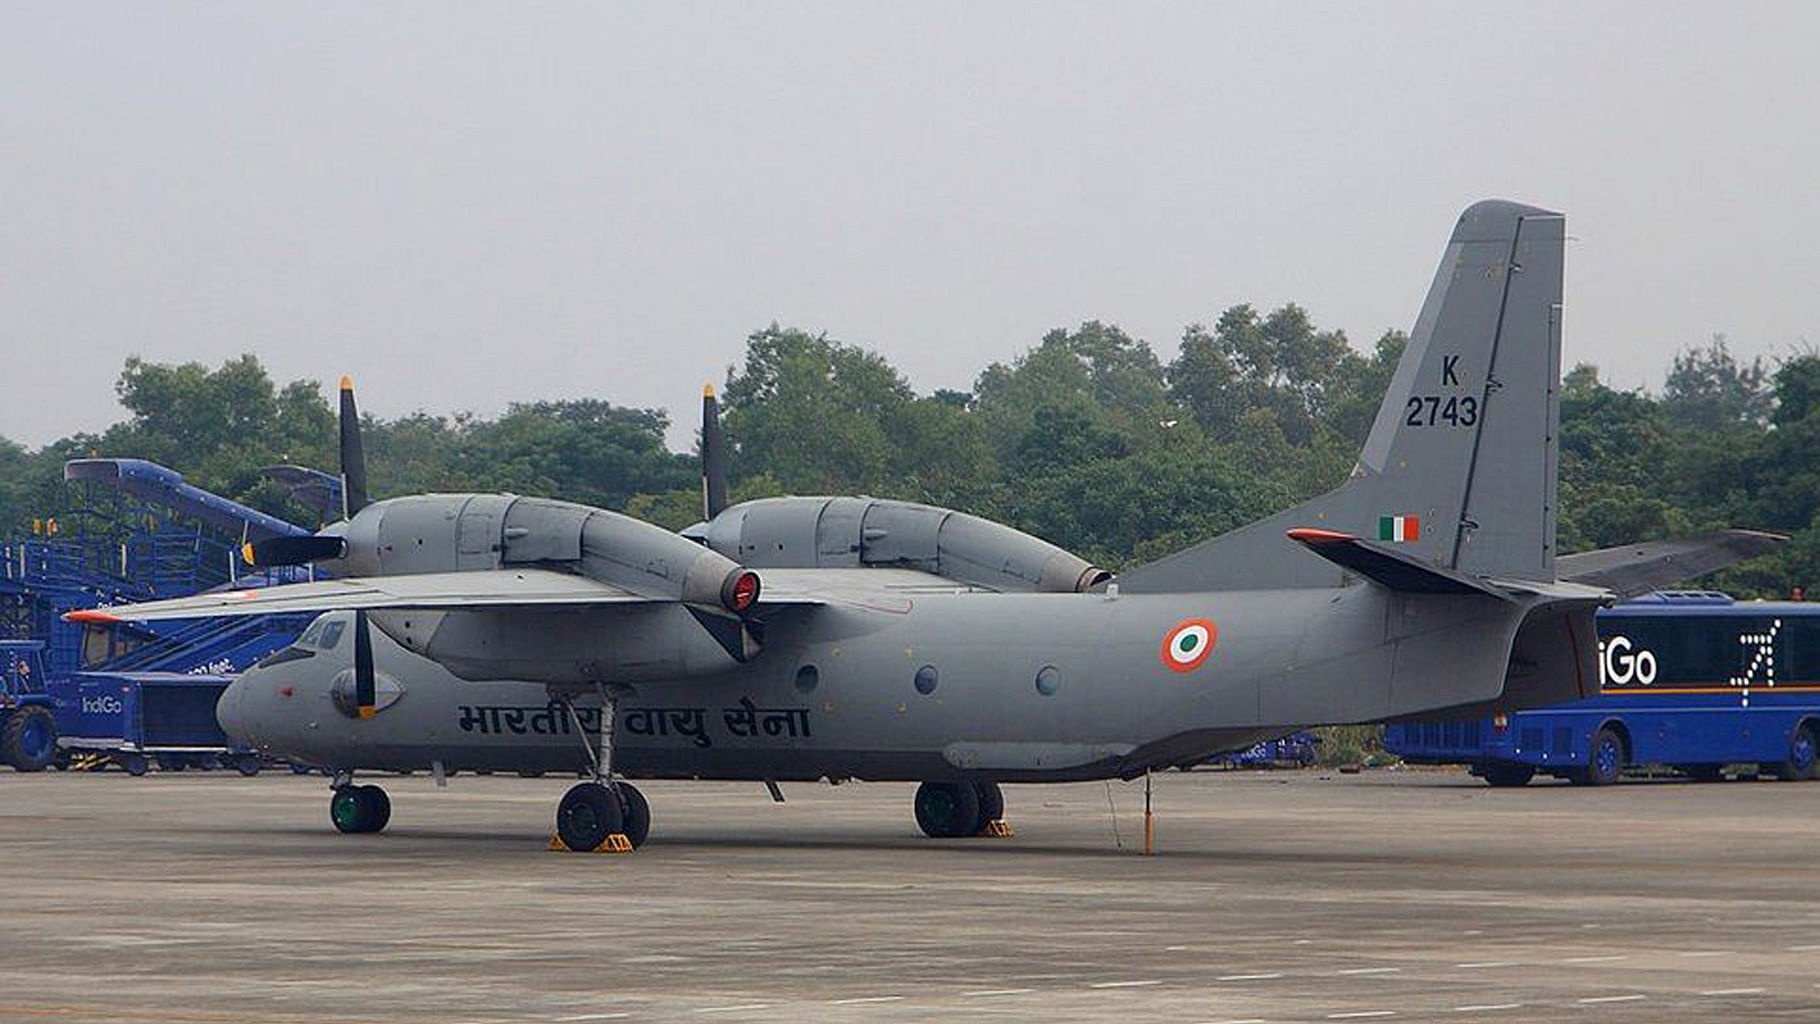 File photo of the Indian Air Force An-32 (K-2743) that’s currently missing over the Bay of Bengal. (Photo Courtesy: Twitter/<a href="https://twitter.com/ShivAroor">@ShivAroor</a>)